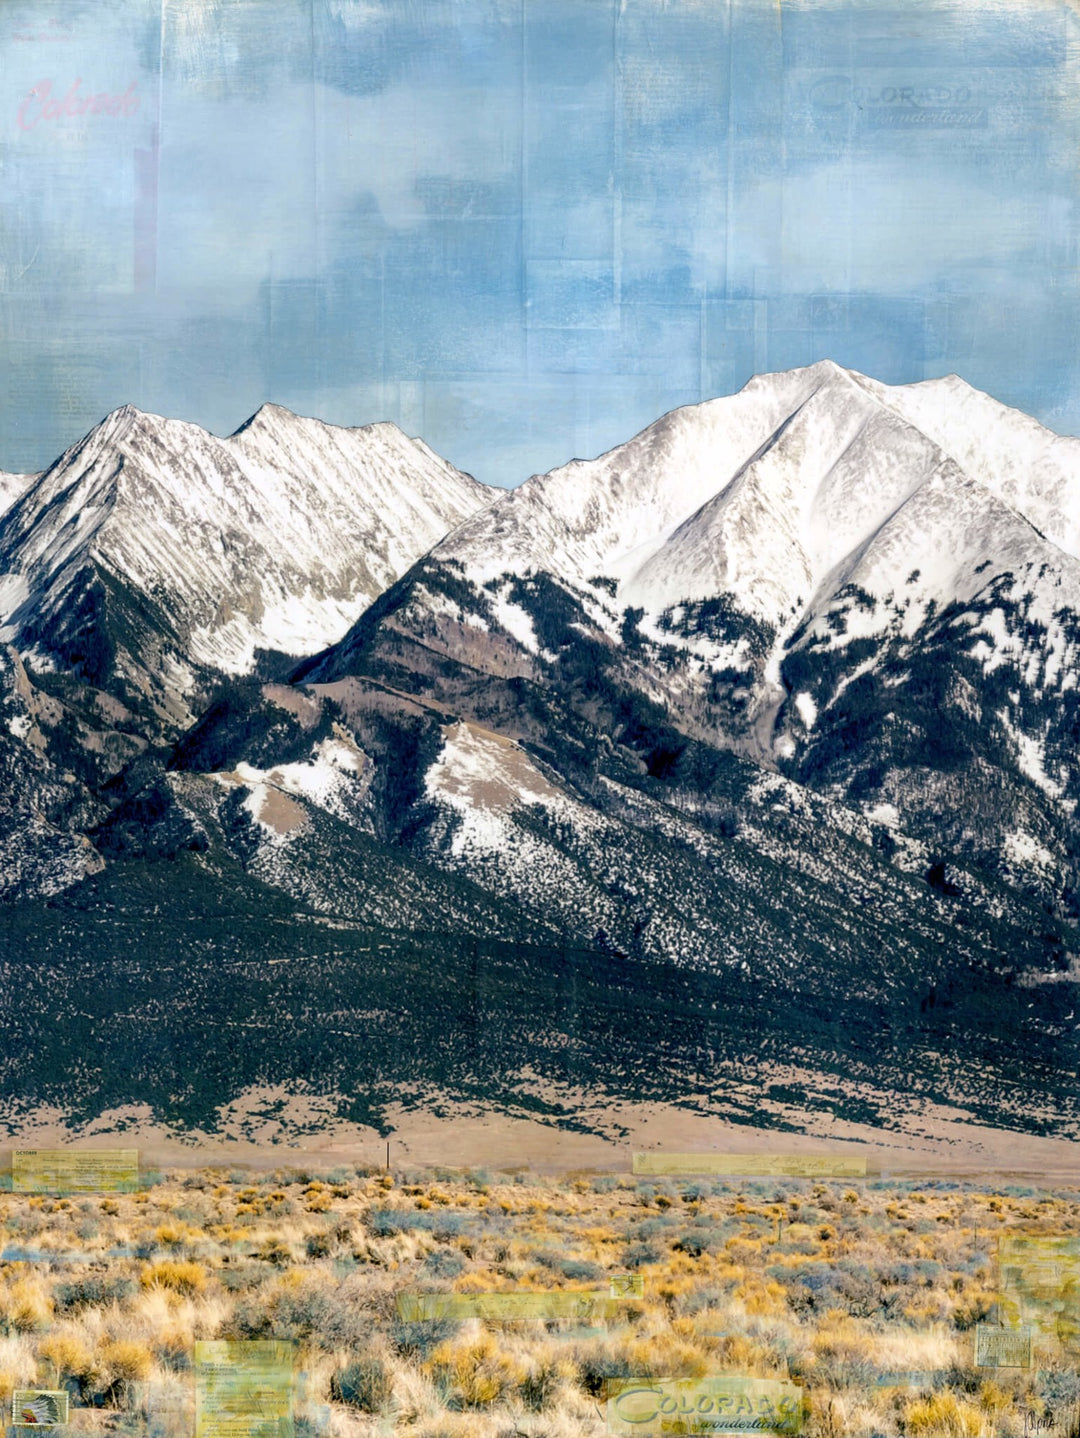 A mixed media painting of a mountain range with snow capped mountains, inspired by the majestic peaks found in JC Spock - "Sagebrush to Peaks" by JC Spock.